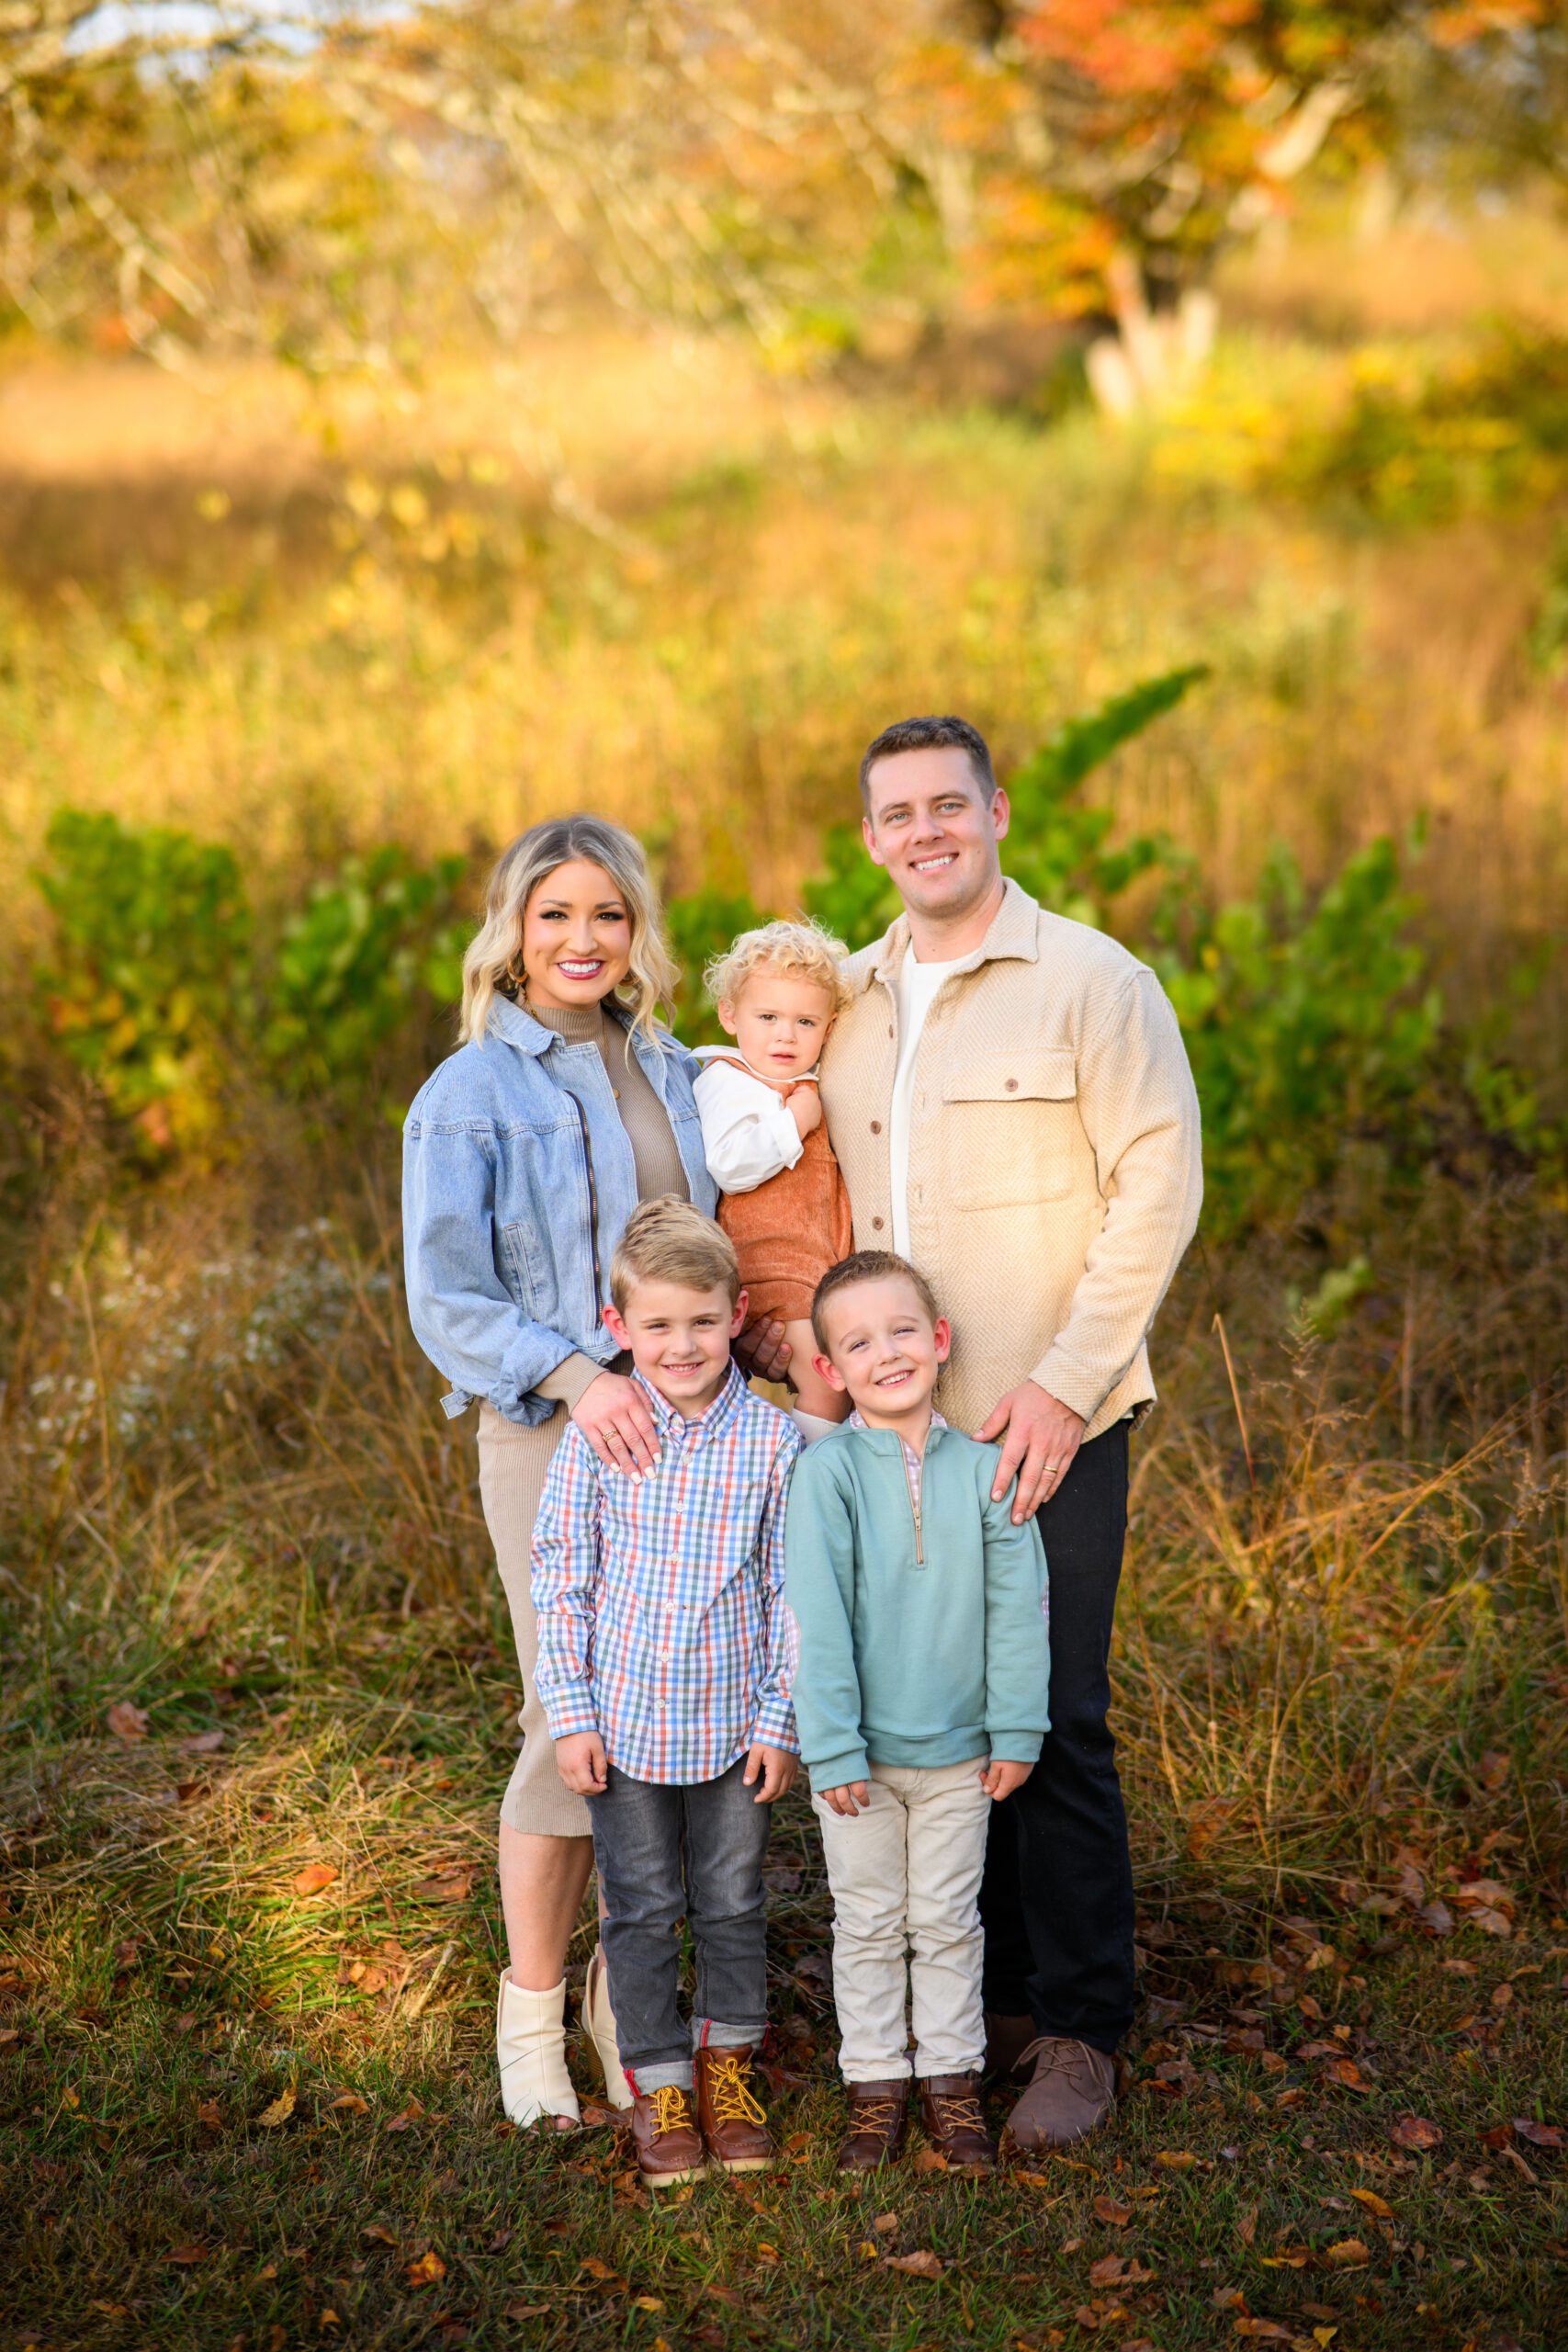 Golden hour during a family portrait session in The Great Smoky Mountains with family photographer Tonya Damron Photography